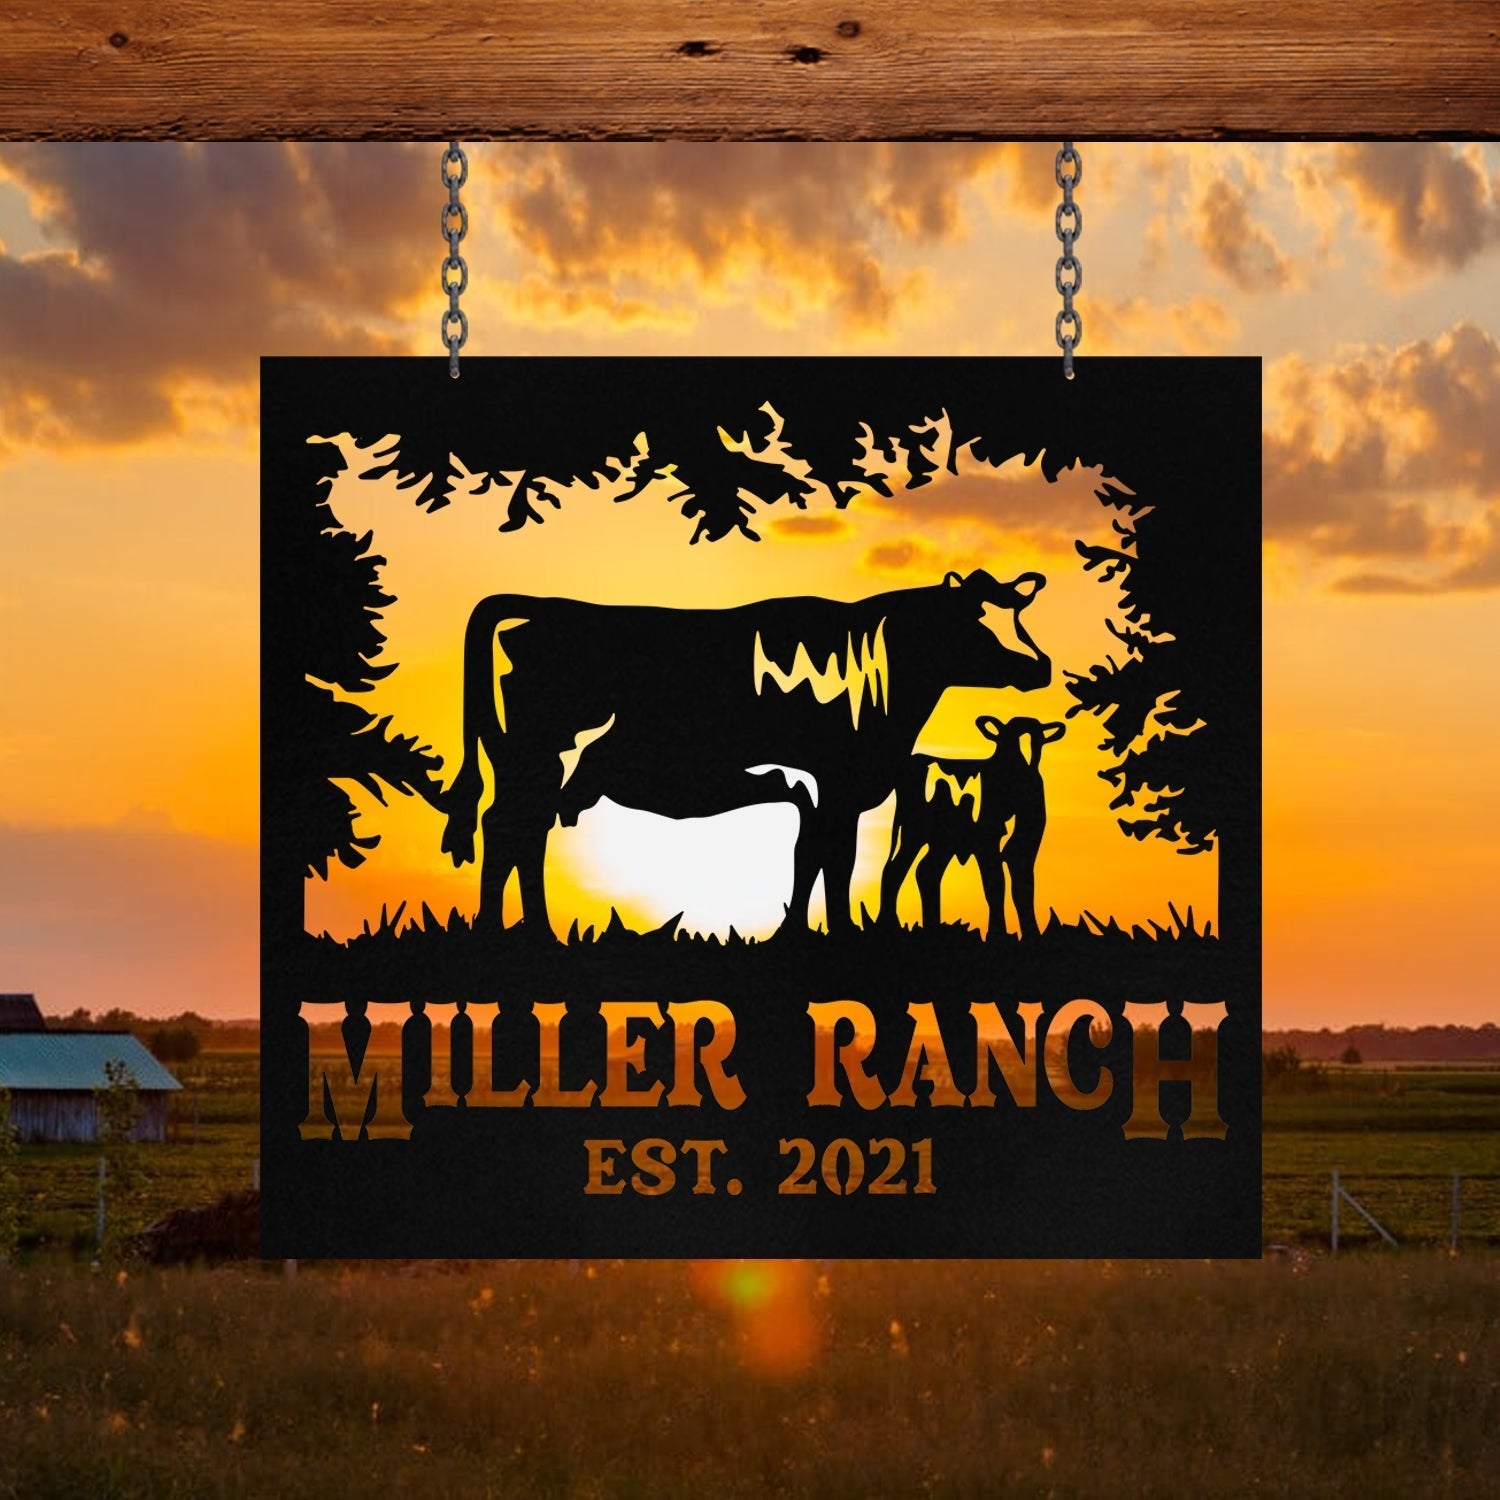 Personalized Metal Farm Sign Cow Cattle Monogram Custom Outdoor Farmhouse Front Gate Ranch Stable Wall Decor Art Gift